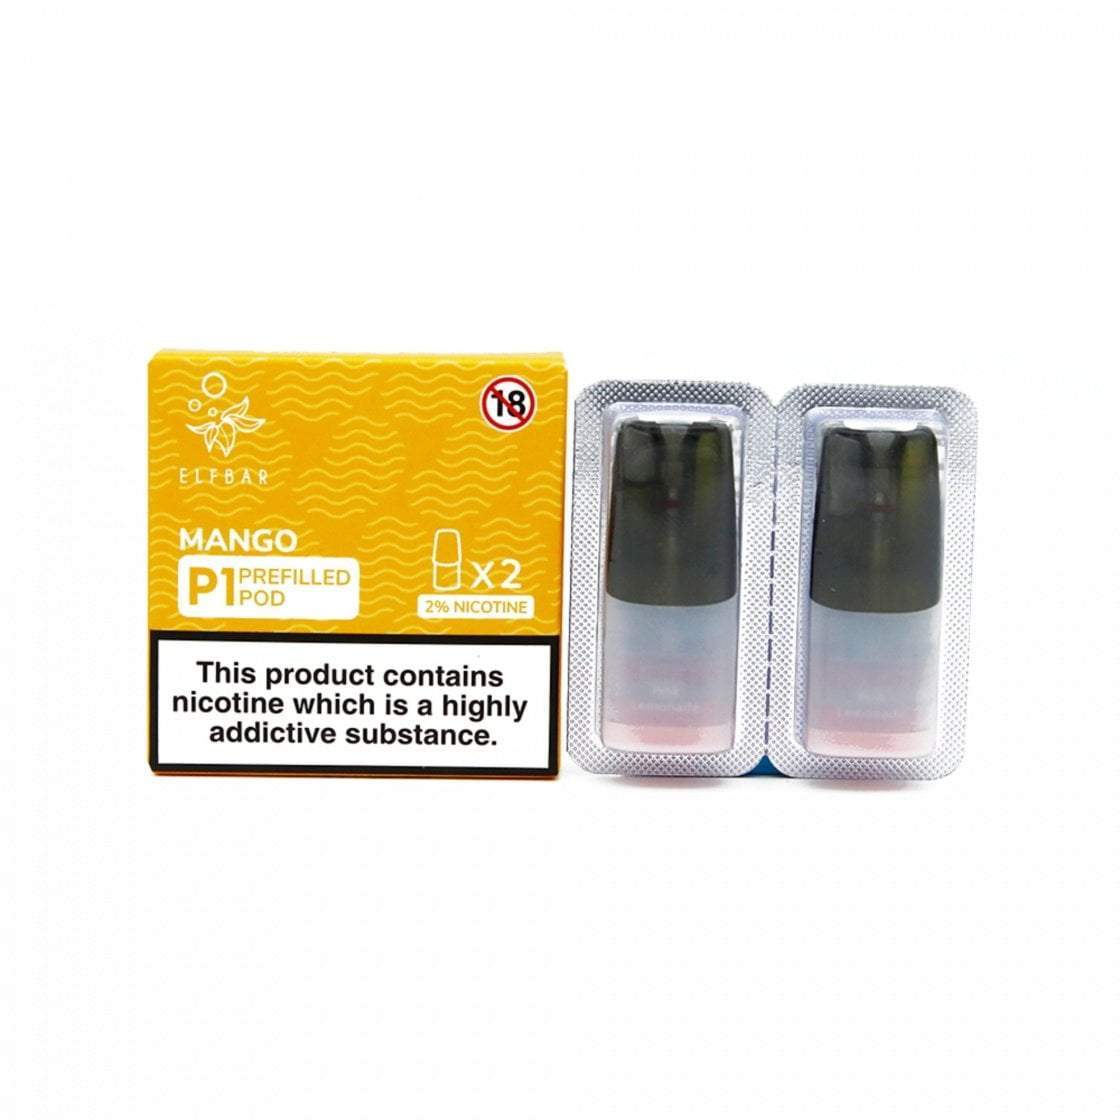 ELF BAR MATE 500 FLAVOURED POD PACK OF 2x REPLACEMENT PODS - FAST DISPATCH